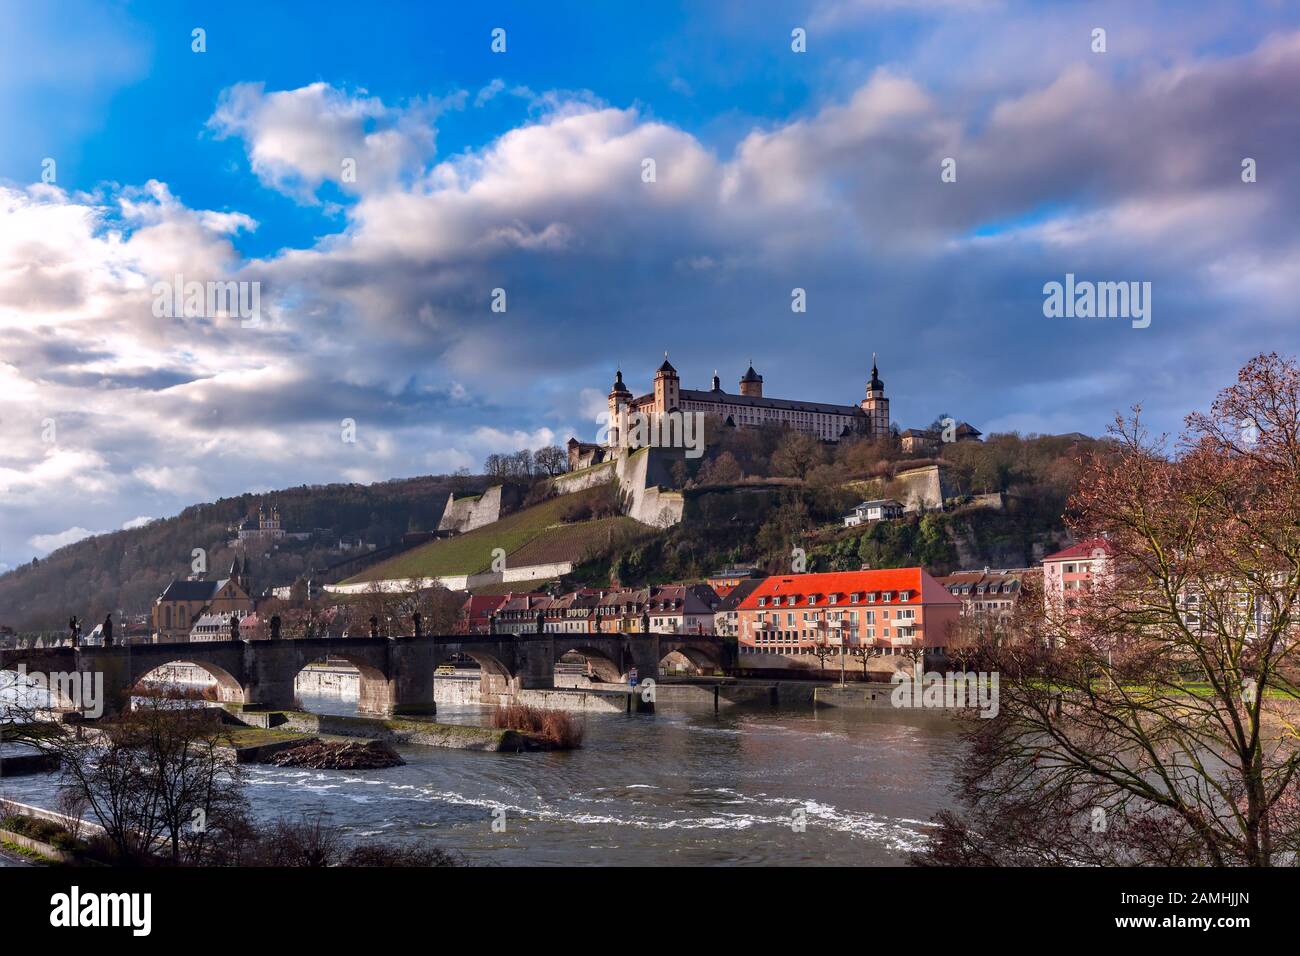 View of Marienberg Fortress and Old Main Bridge, Alte Mainbrucke in Wurzburg, part of Romantic Road, Franconia, Bavaria, Germany Stock Photo